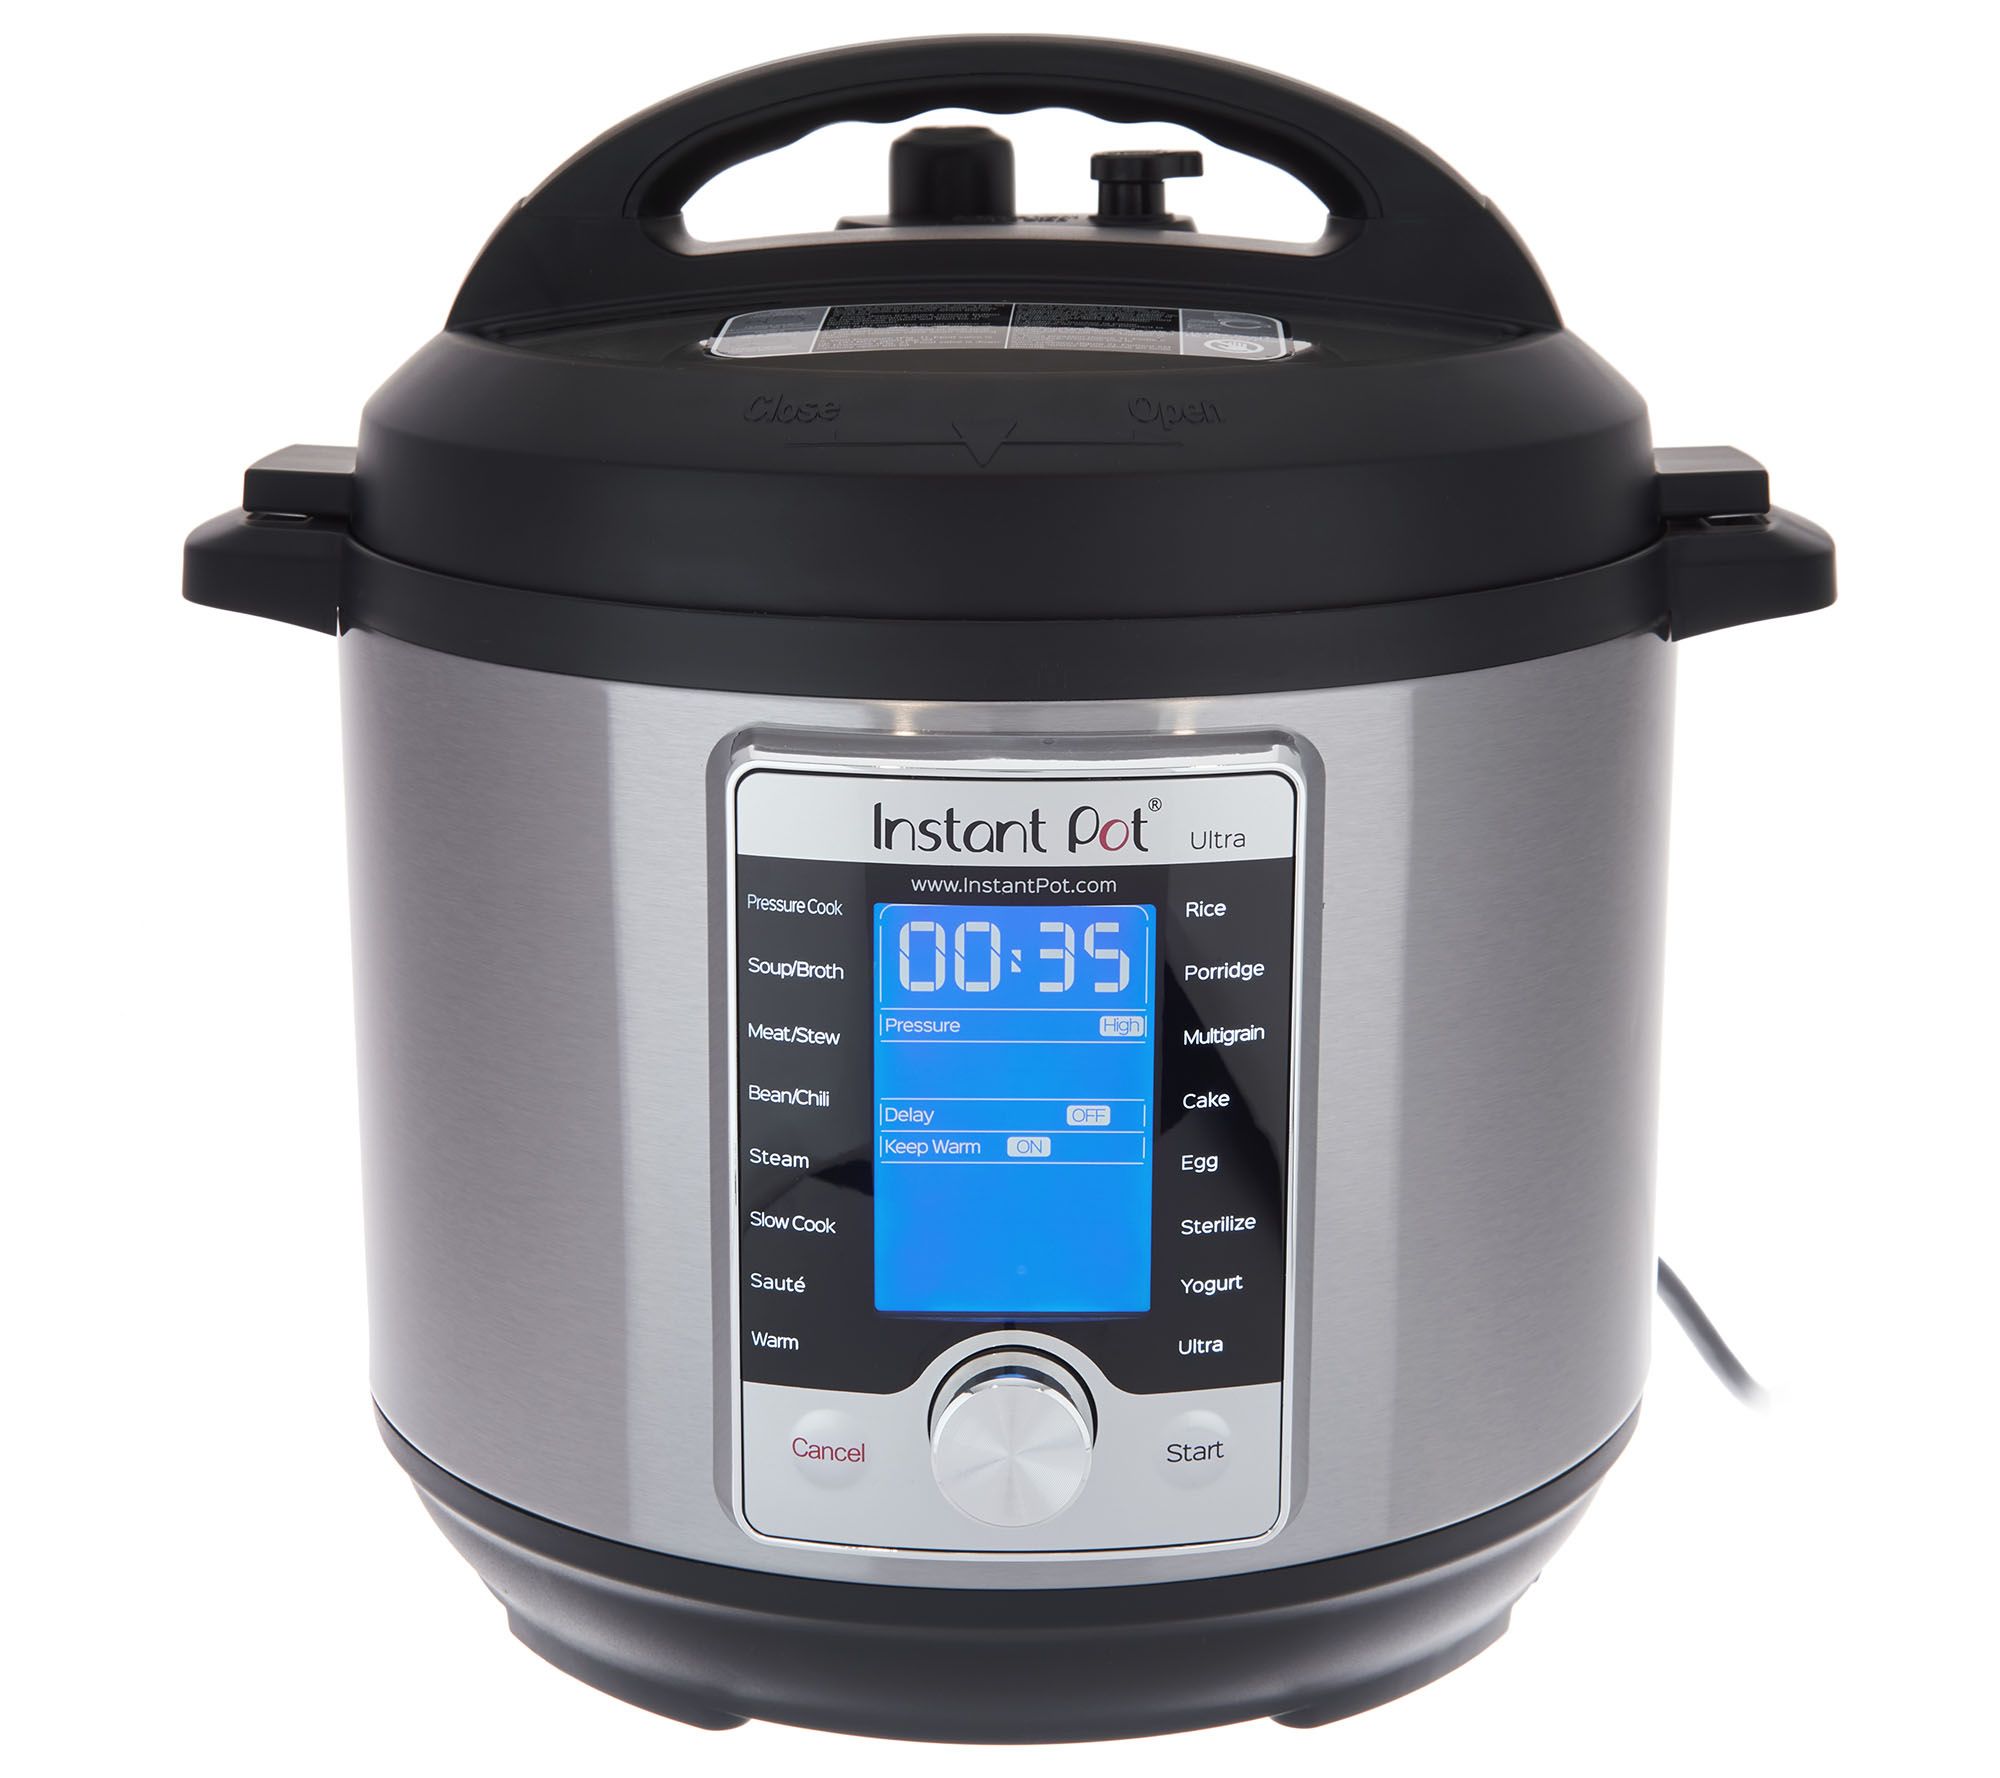 Instant Pot Ultra 6 Qt Pressure Cooker - Heart of the Home Kitchen